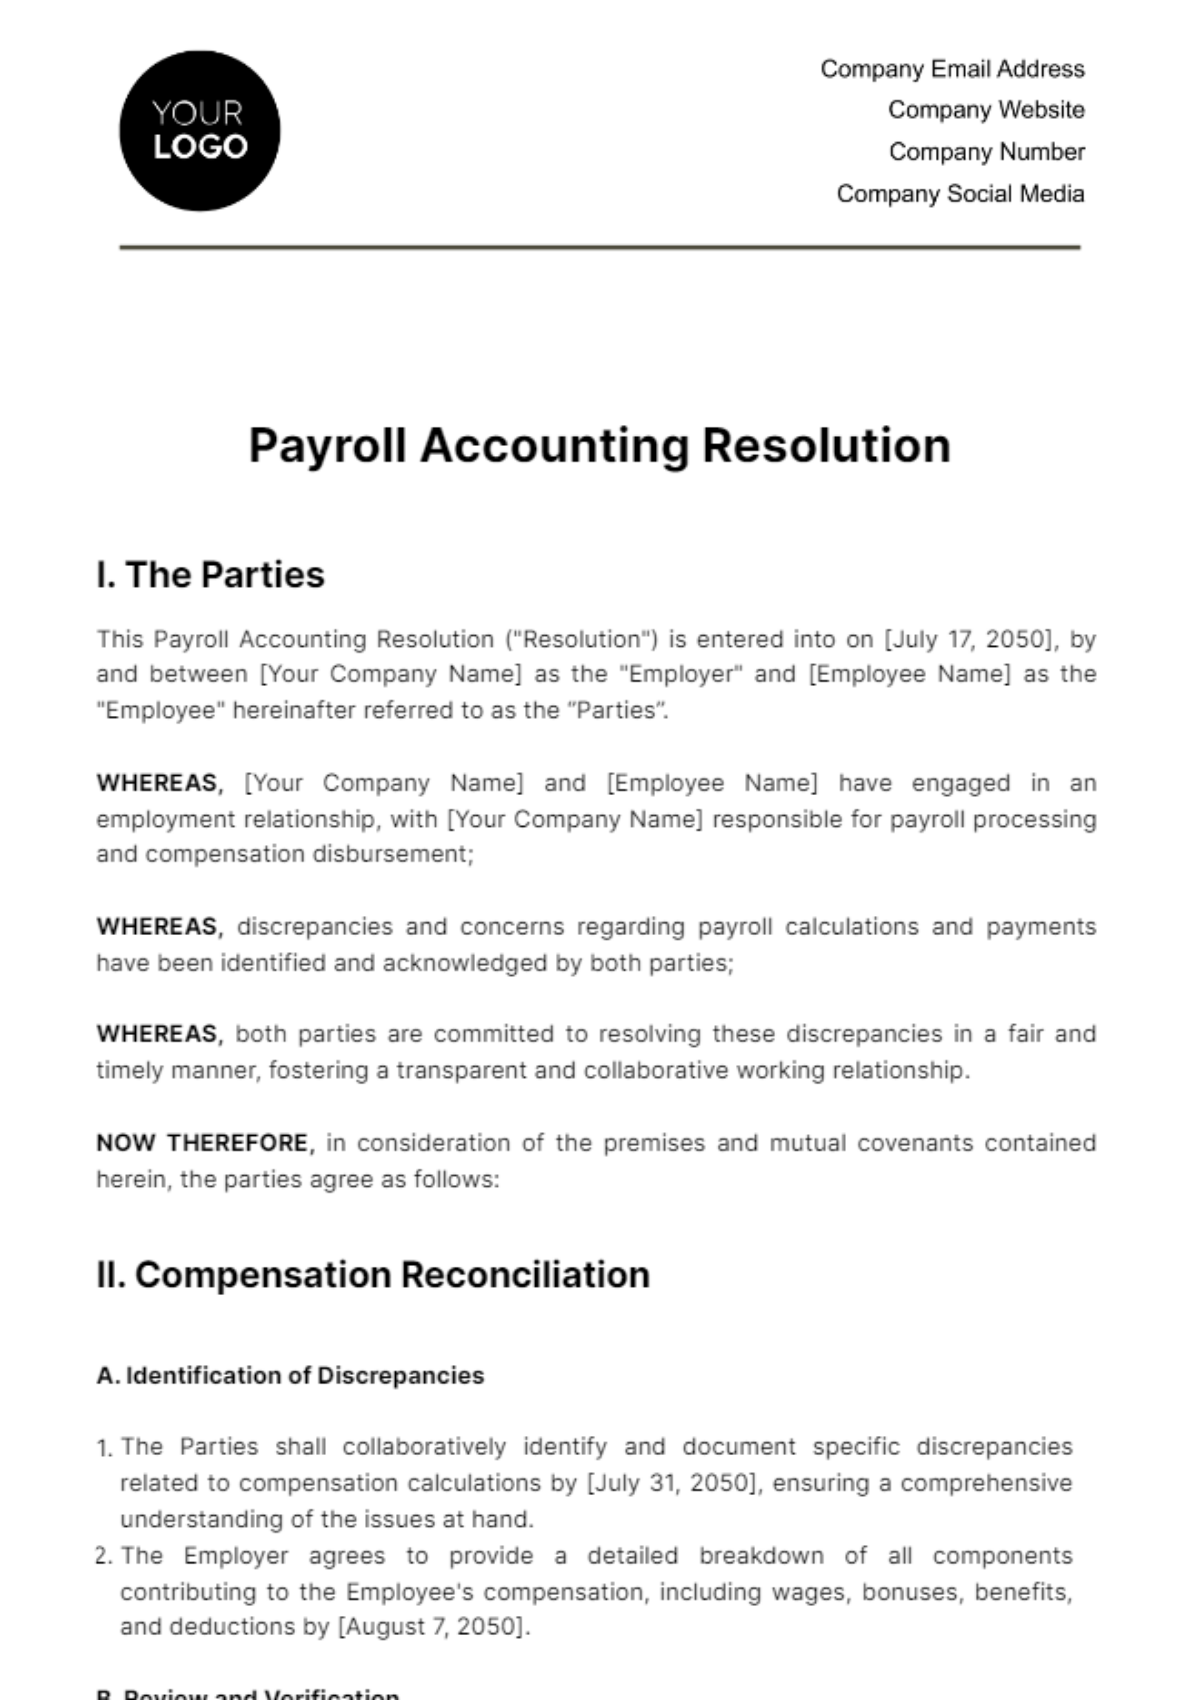 Free Payroll Accounting Resolution Template